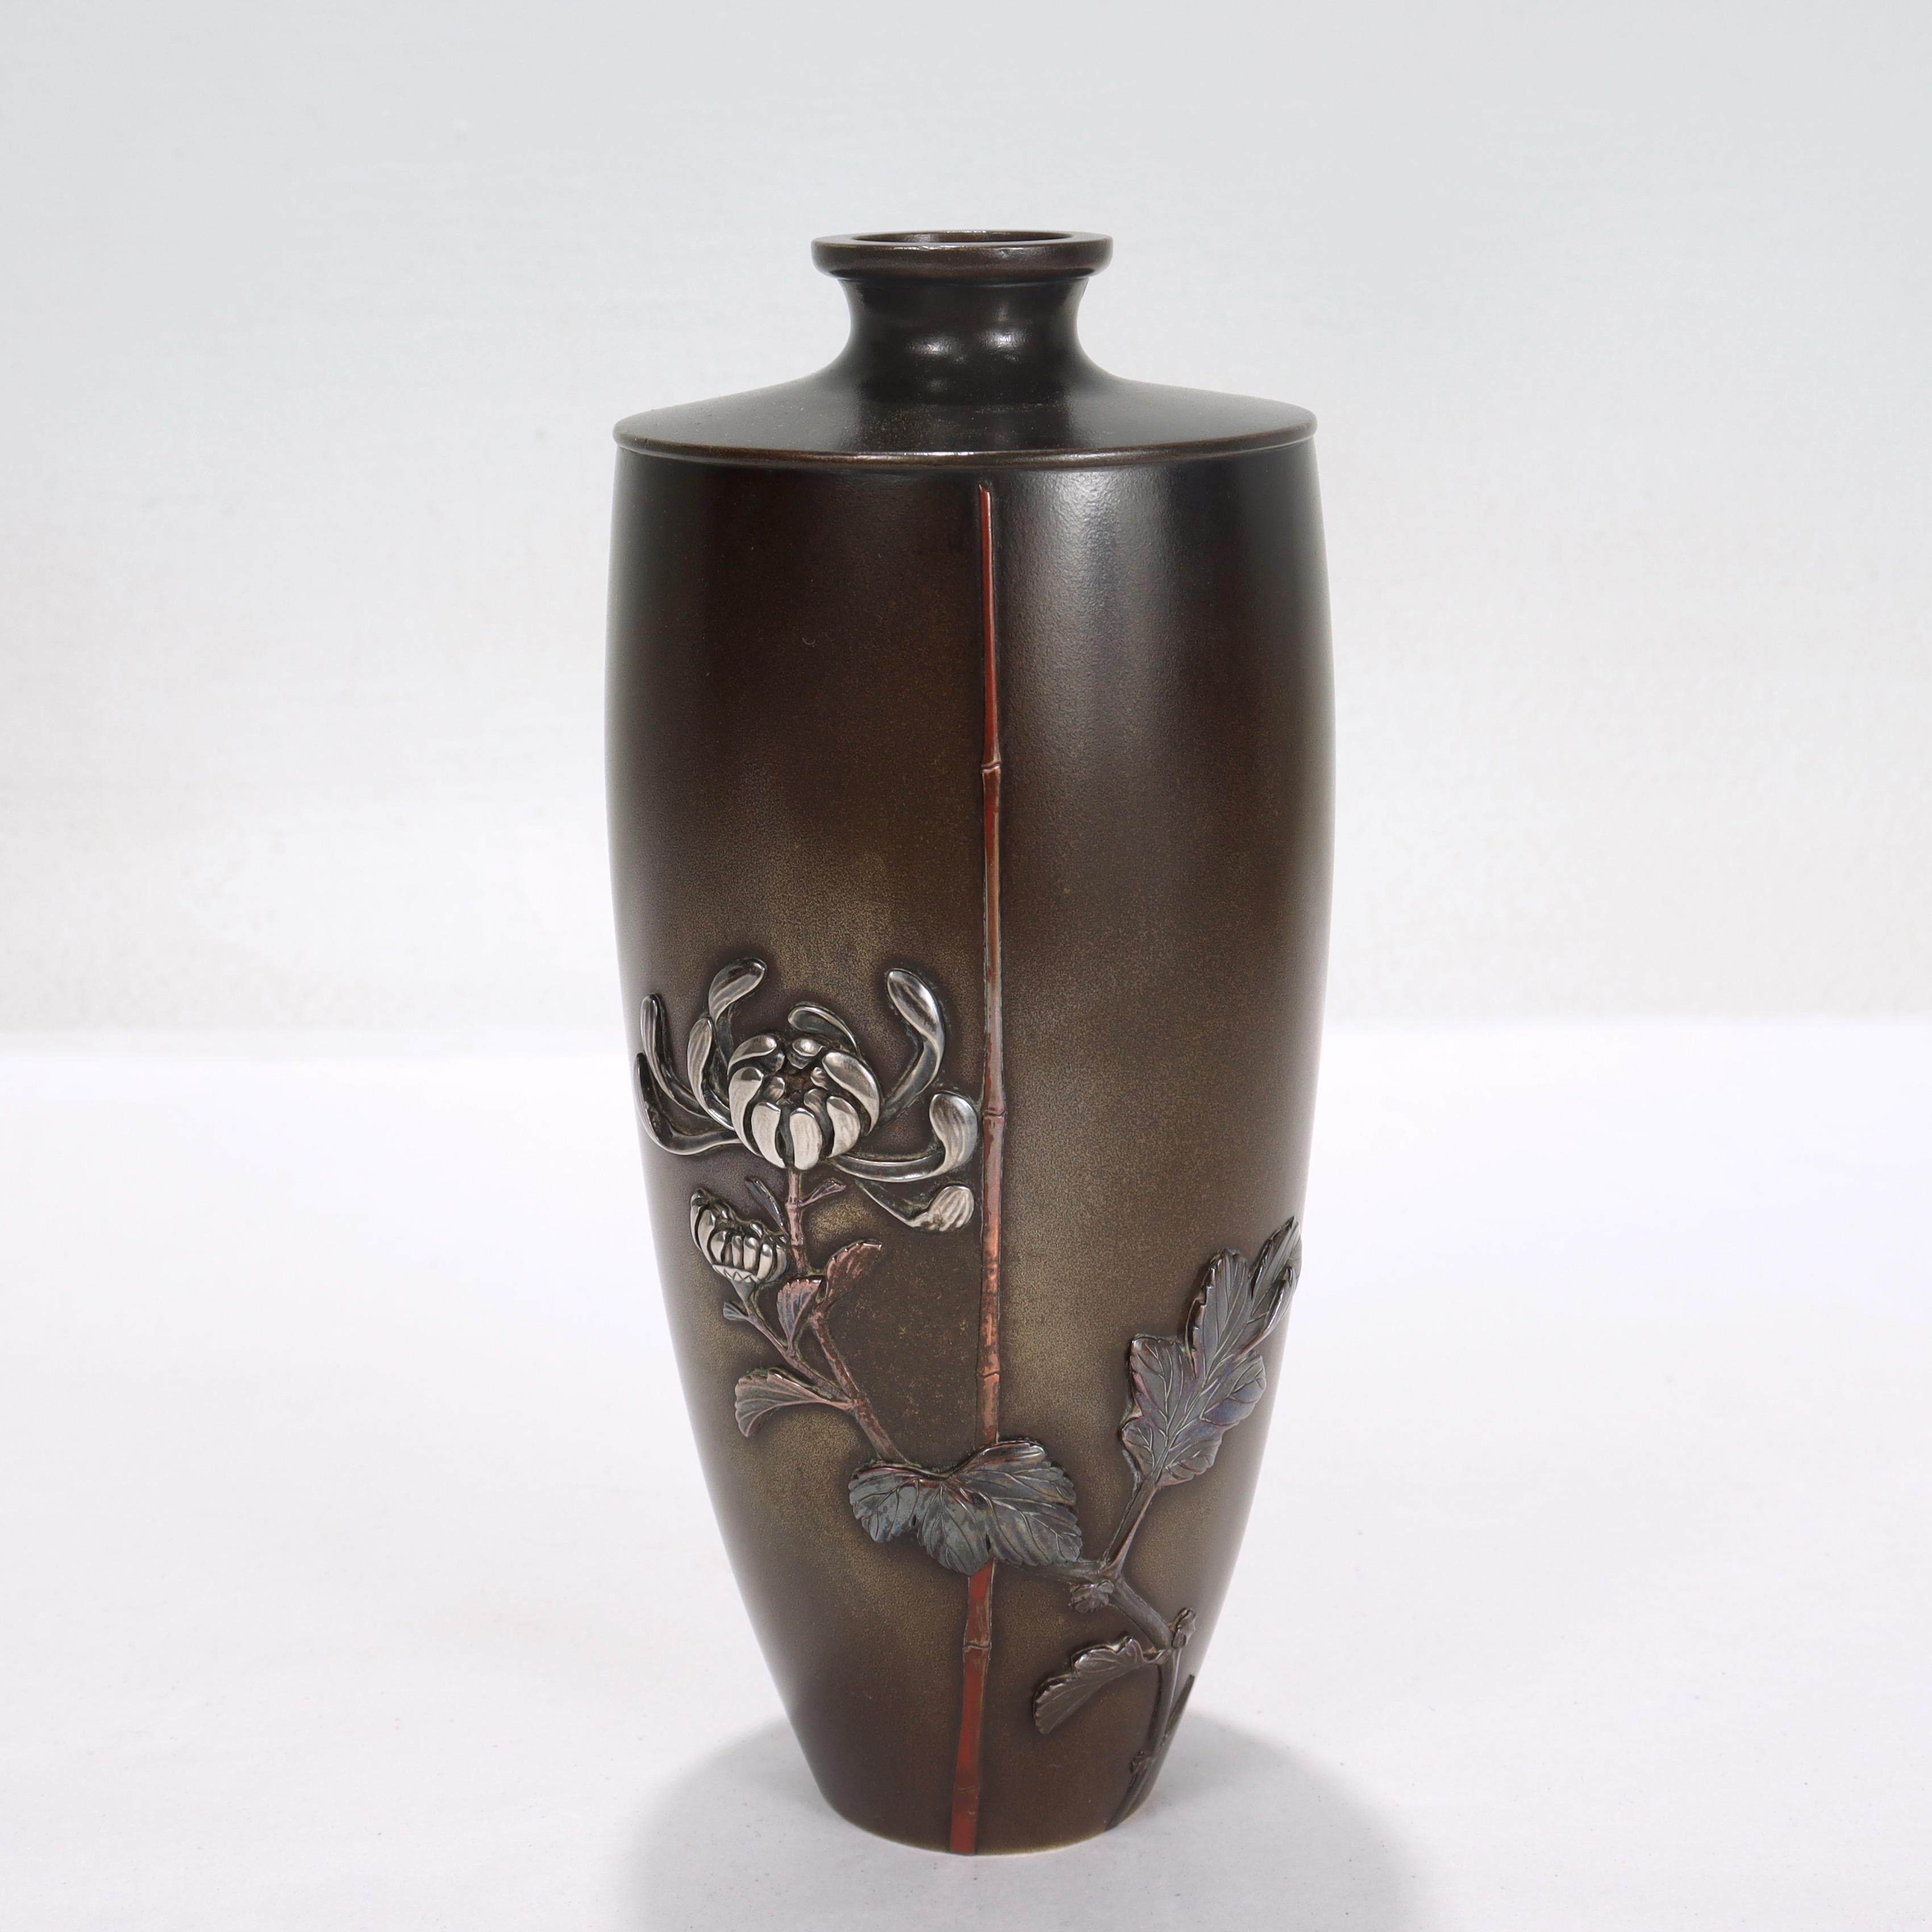 A fine signed antique Japanese Meiji period mixed metals vase.

By Miyabe Atsuyoshi for Inoue of Kyoto.

With a bronze body and decorated with inlaid gold, silver, and shibuichi in the form of a stylized chrysanthemum and bamboo.

Engraved